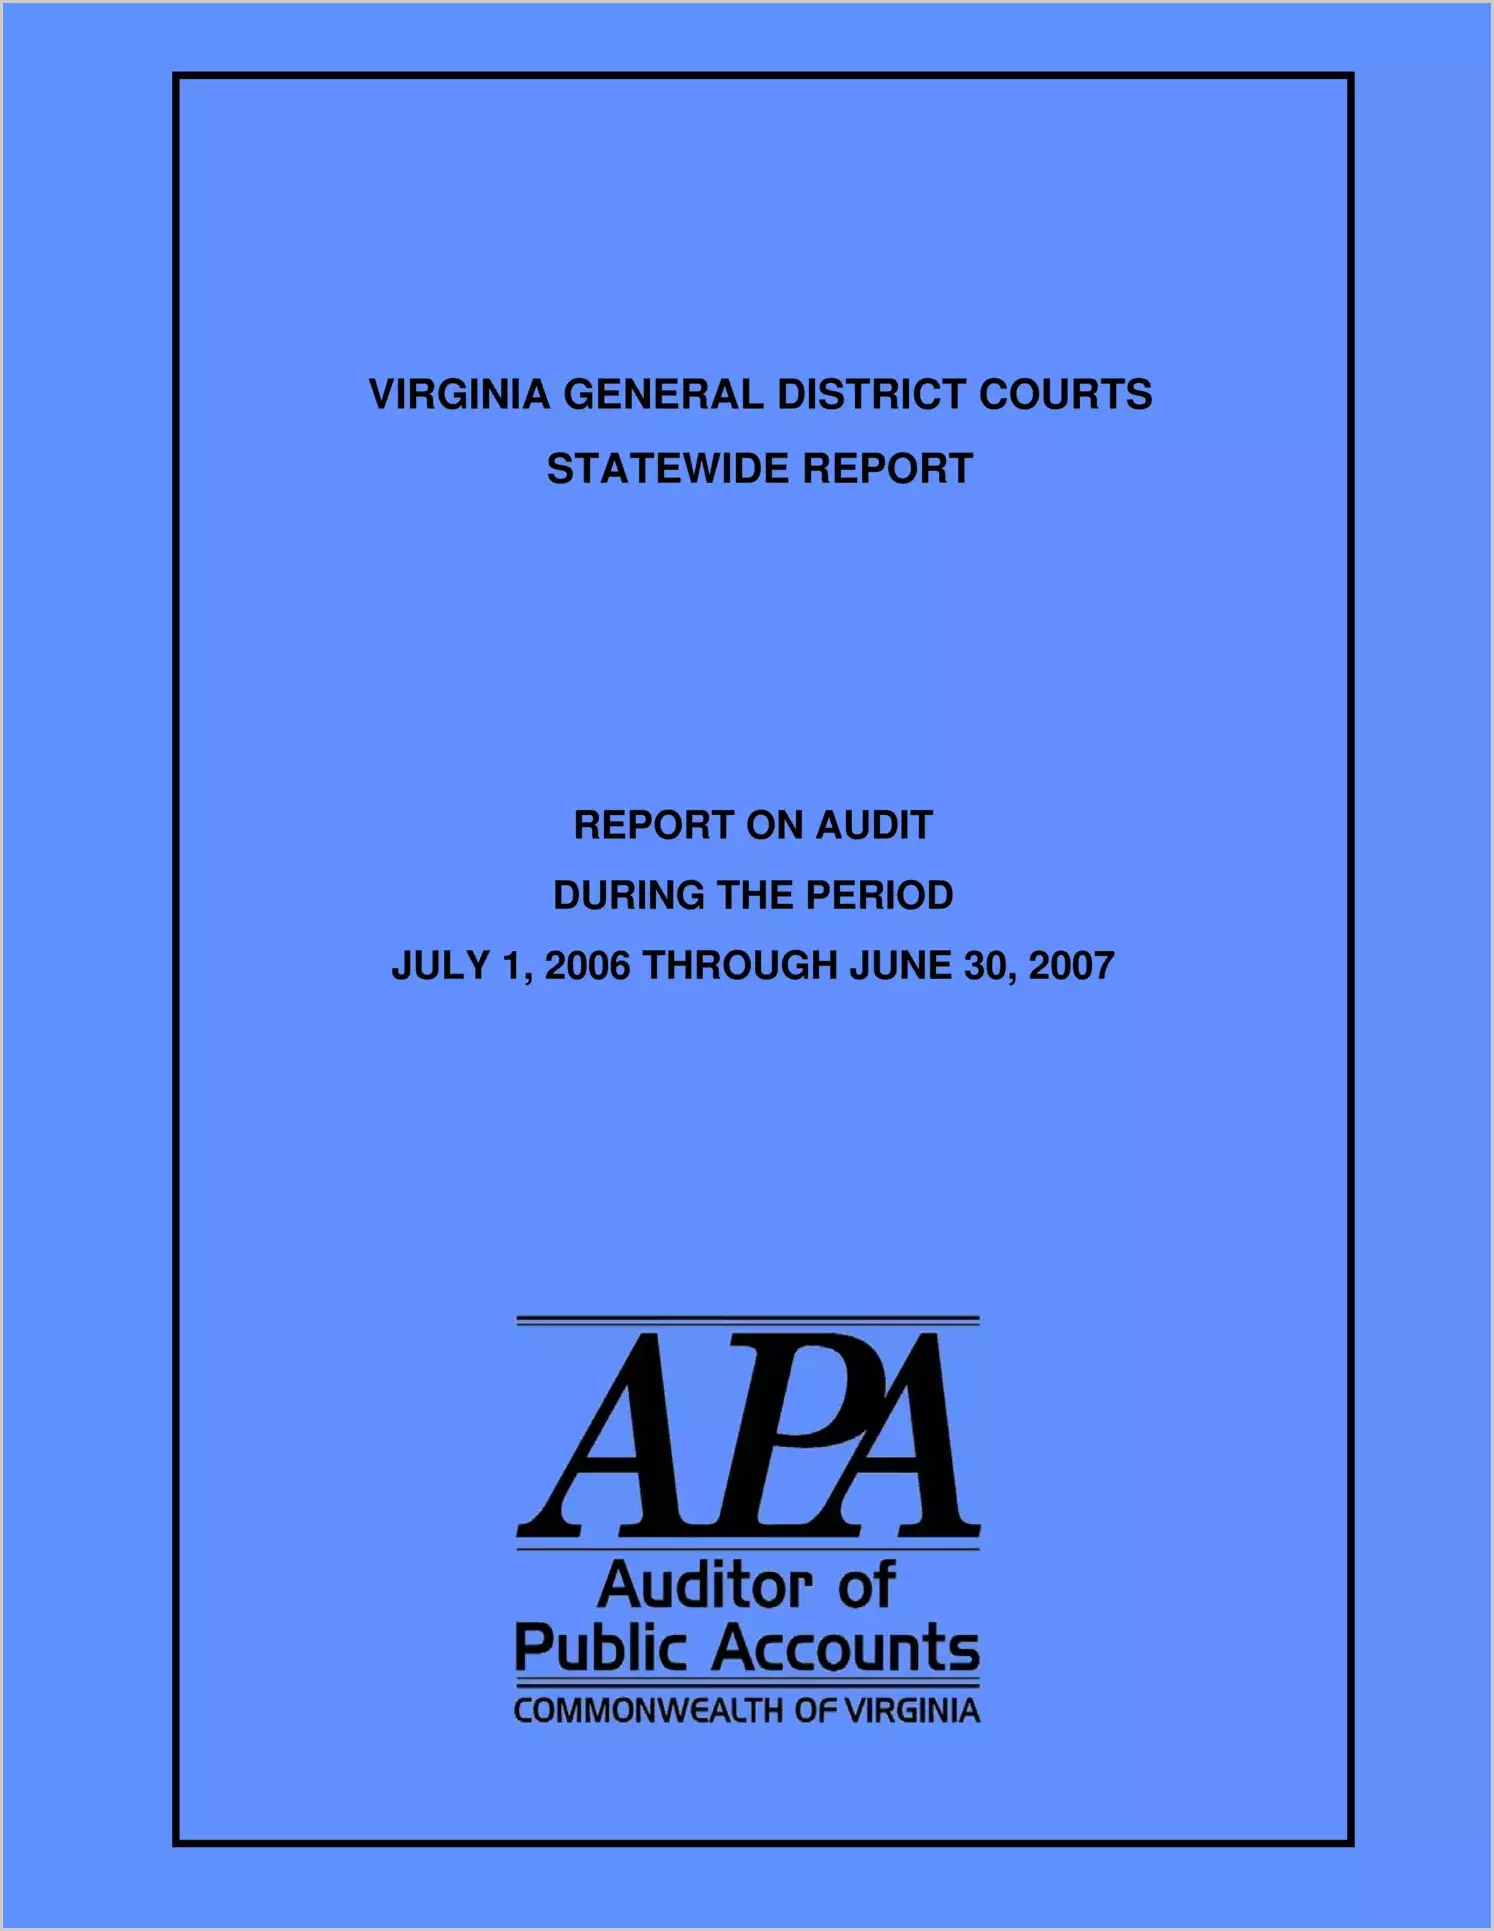 Virginia General District Courts Statewide Report on Audit during the period July 1, 2006 through June 30, 2007